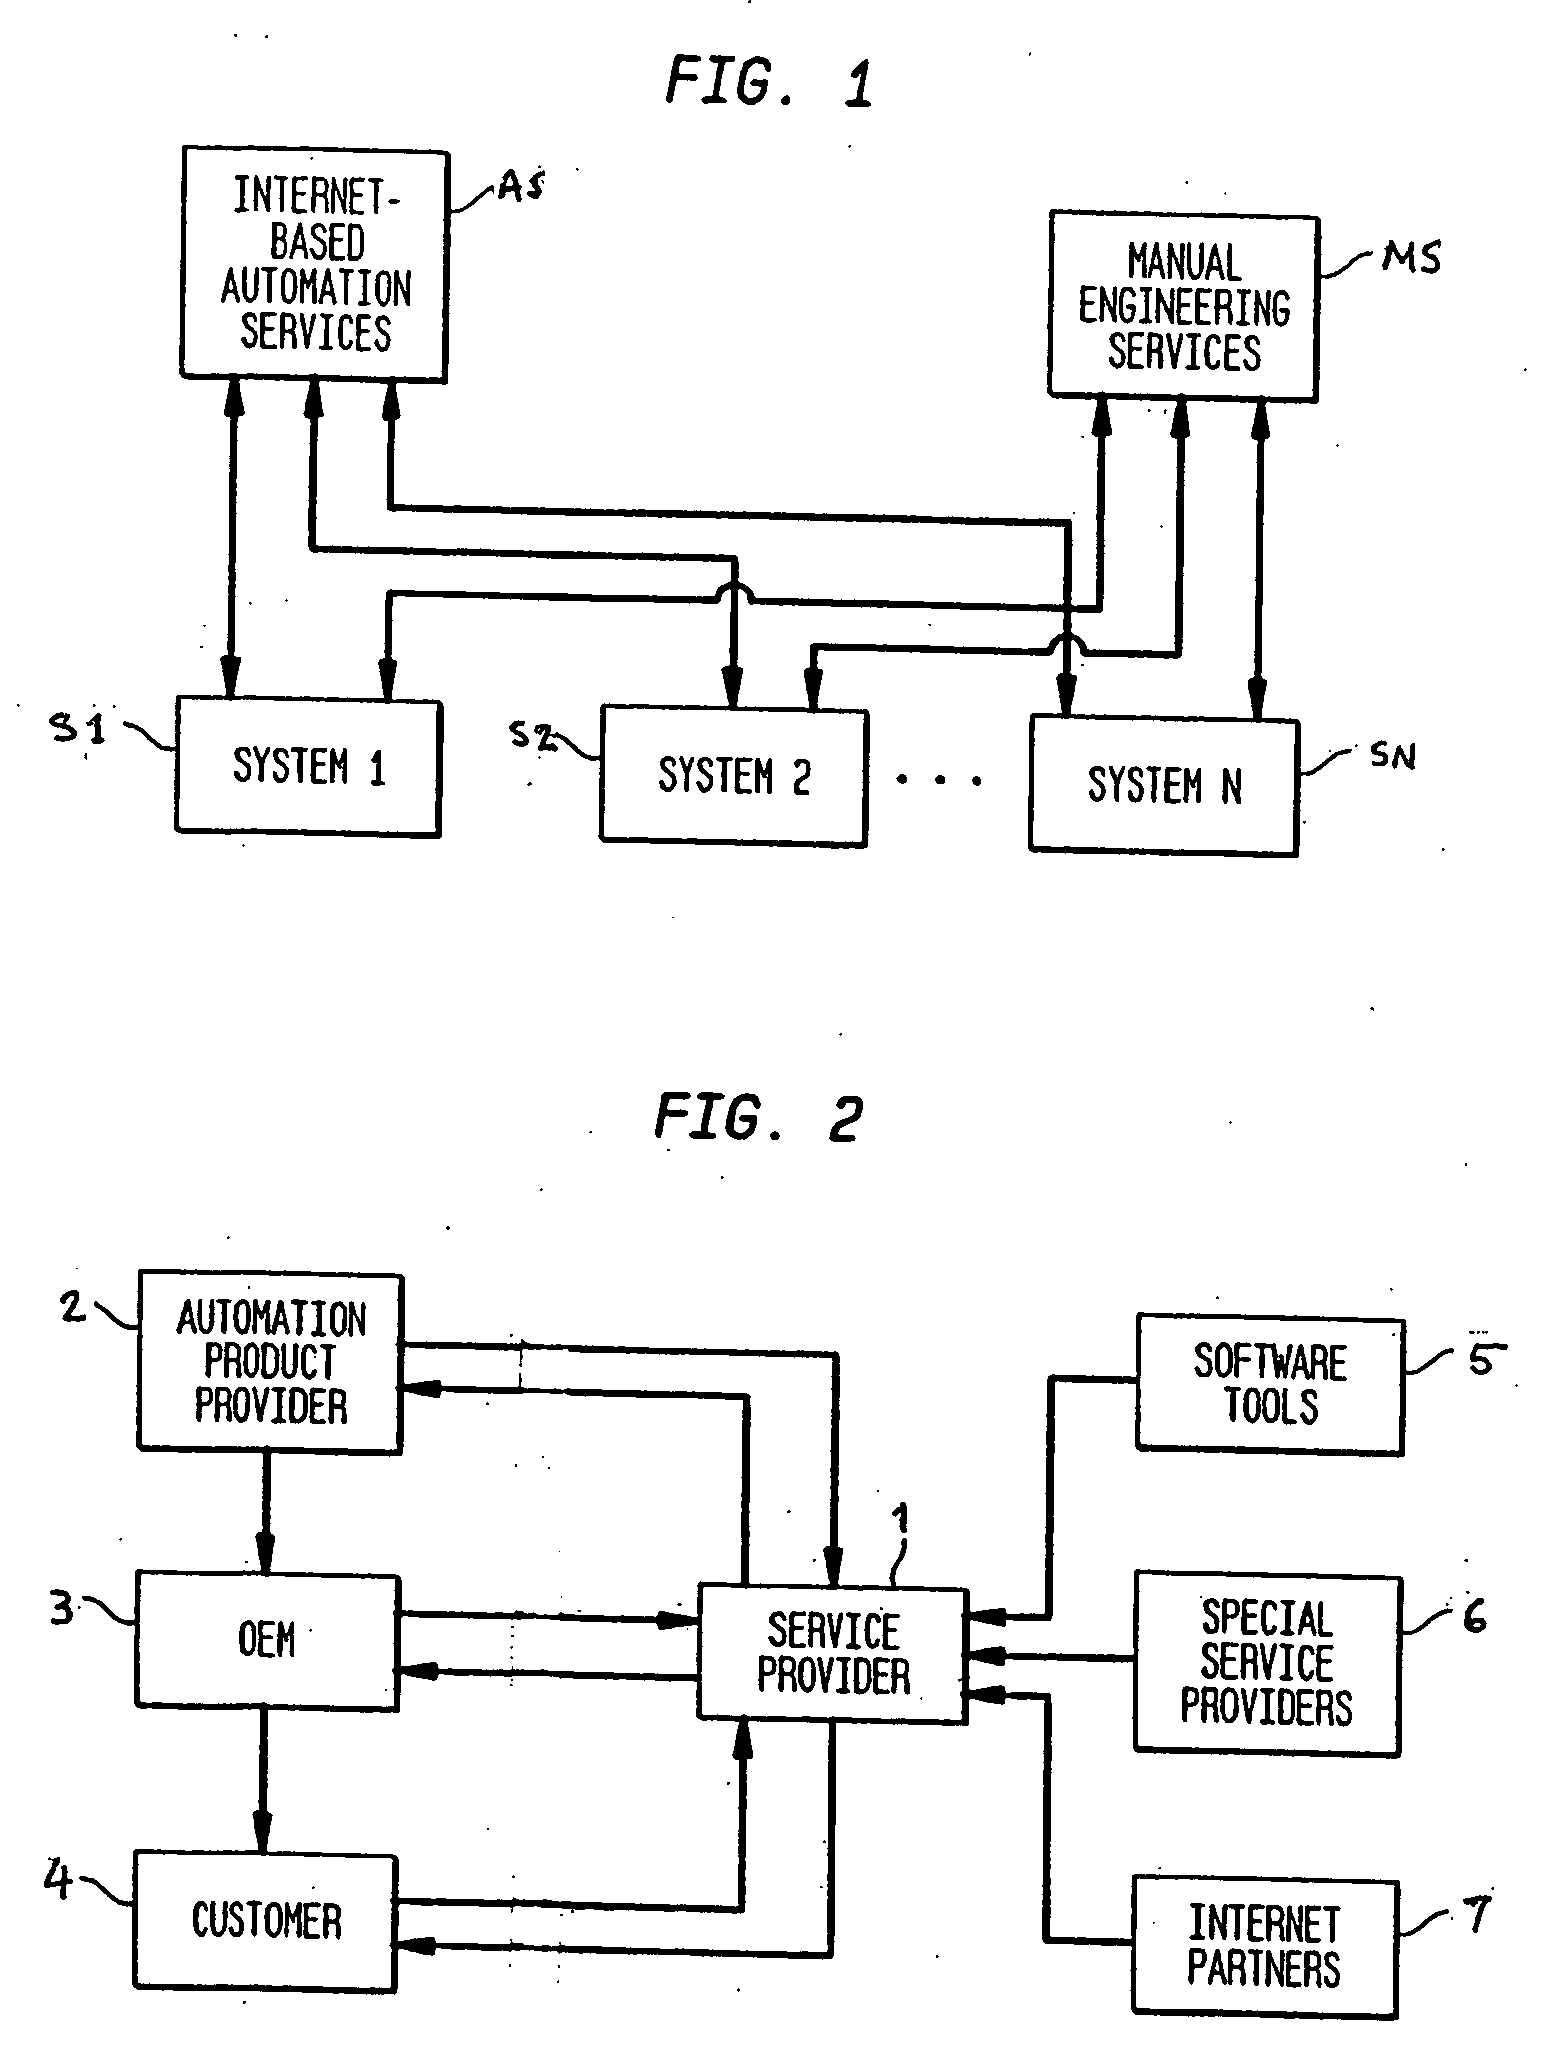 Method and system for the electronic provision of services for machines via a data communication link